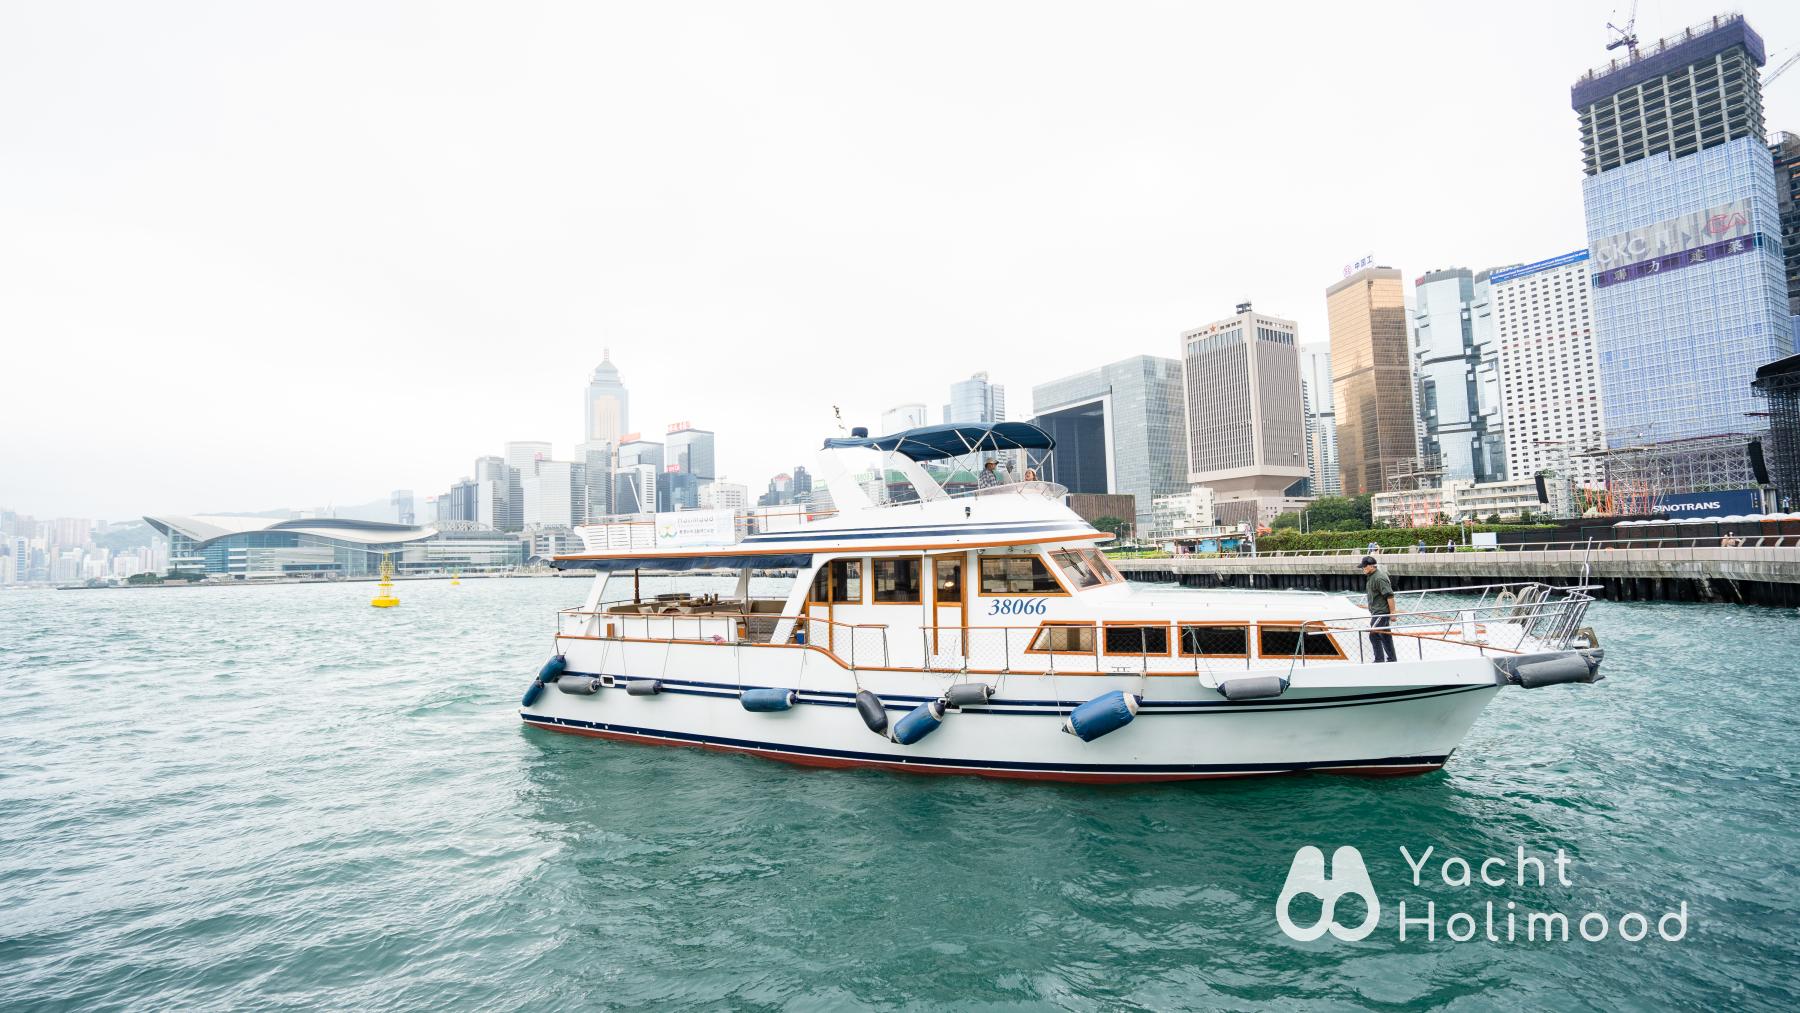 CK01 Quality Classic Junk boat| Victoria Harbour pick up & drop off| Experienced Captains 1